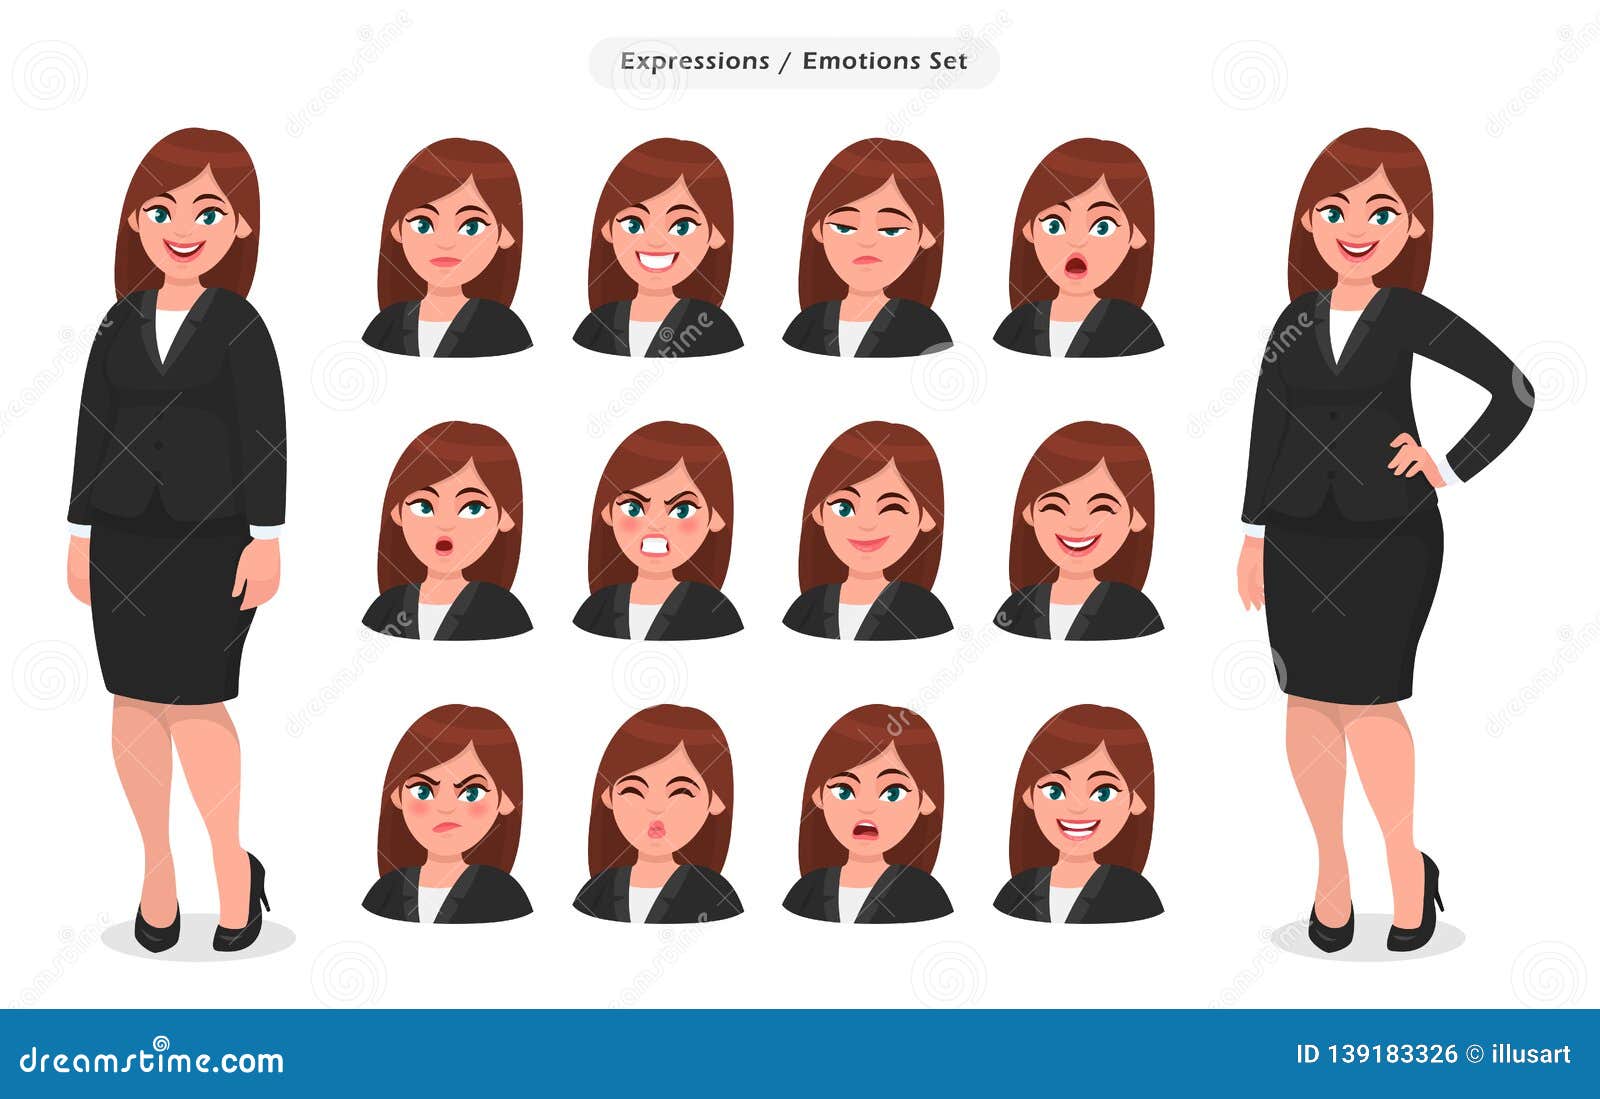 set of different face expressions/emotions for female cartoon character. beautiful woman emoji/avatar with various facial.